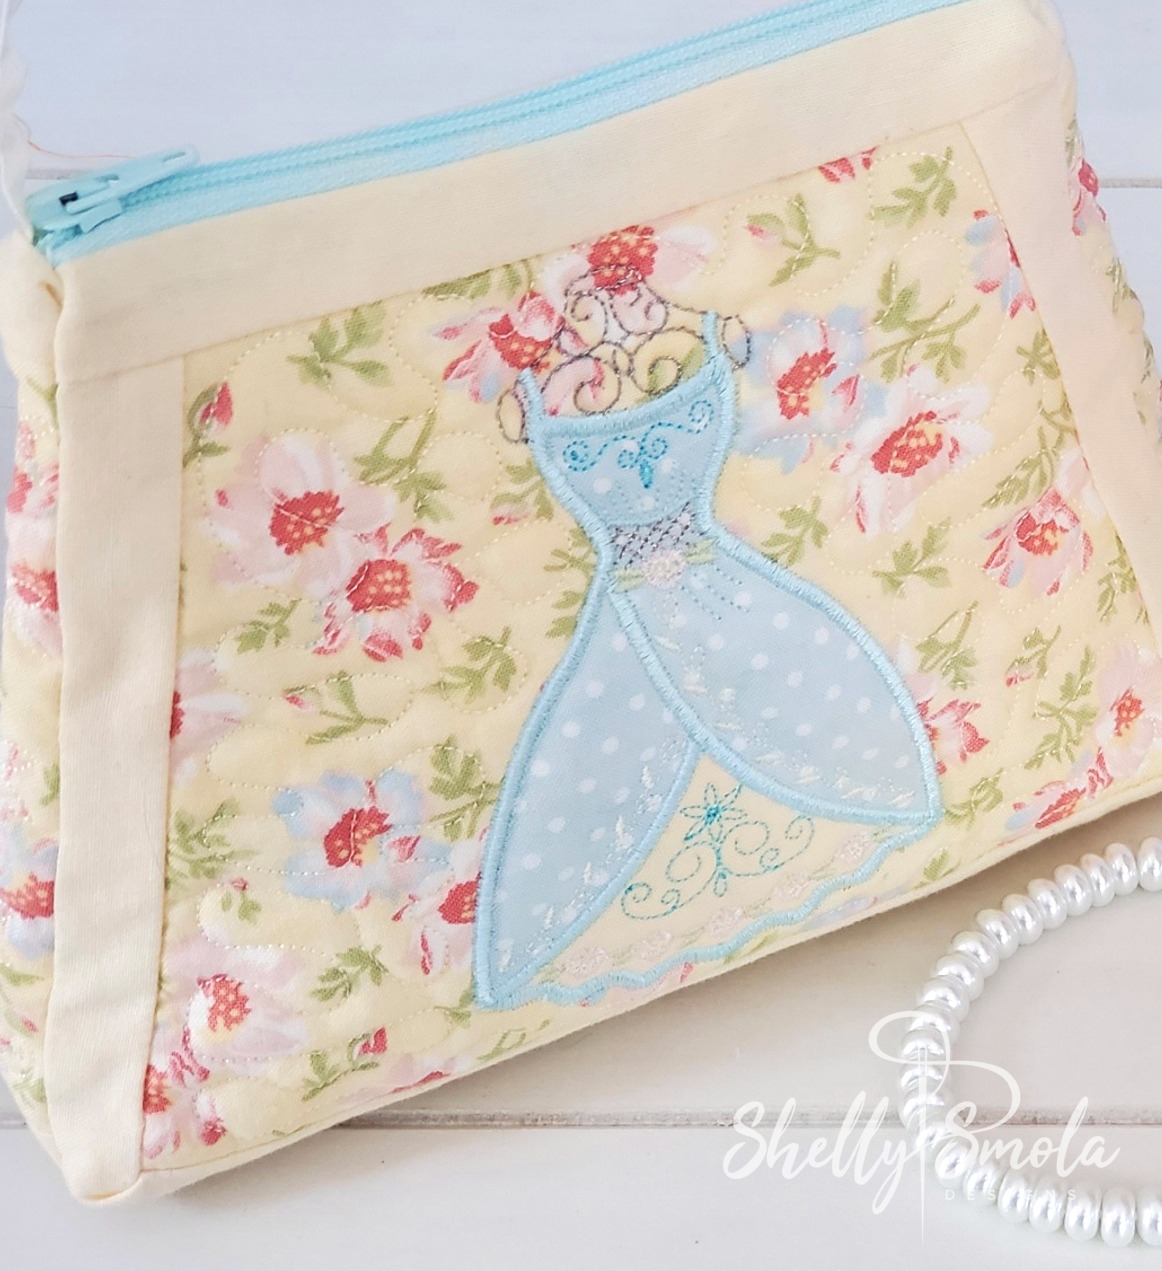 Embroidered Bridal Purse